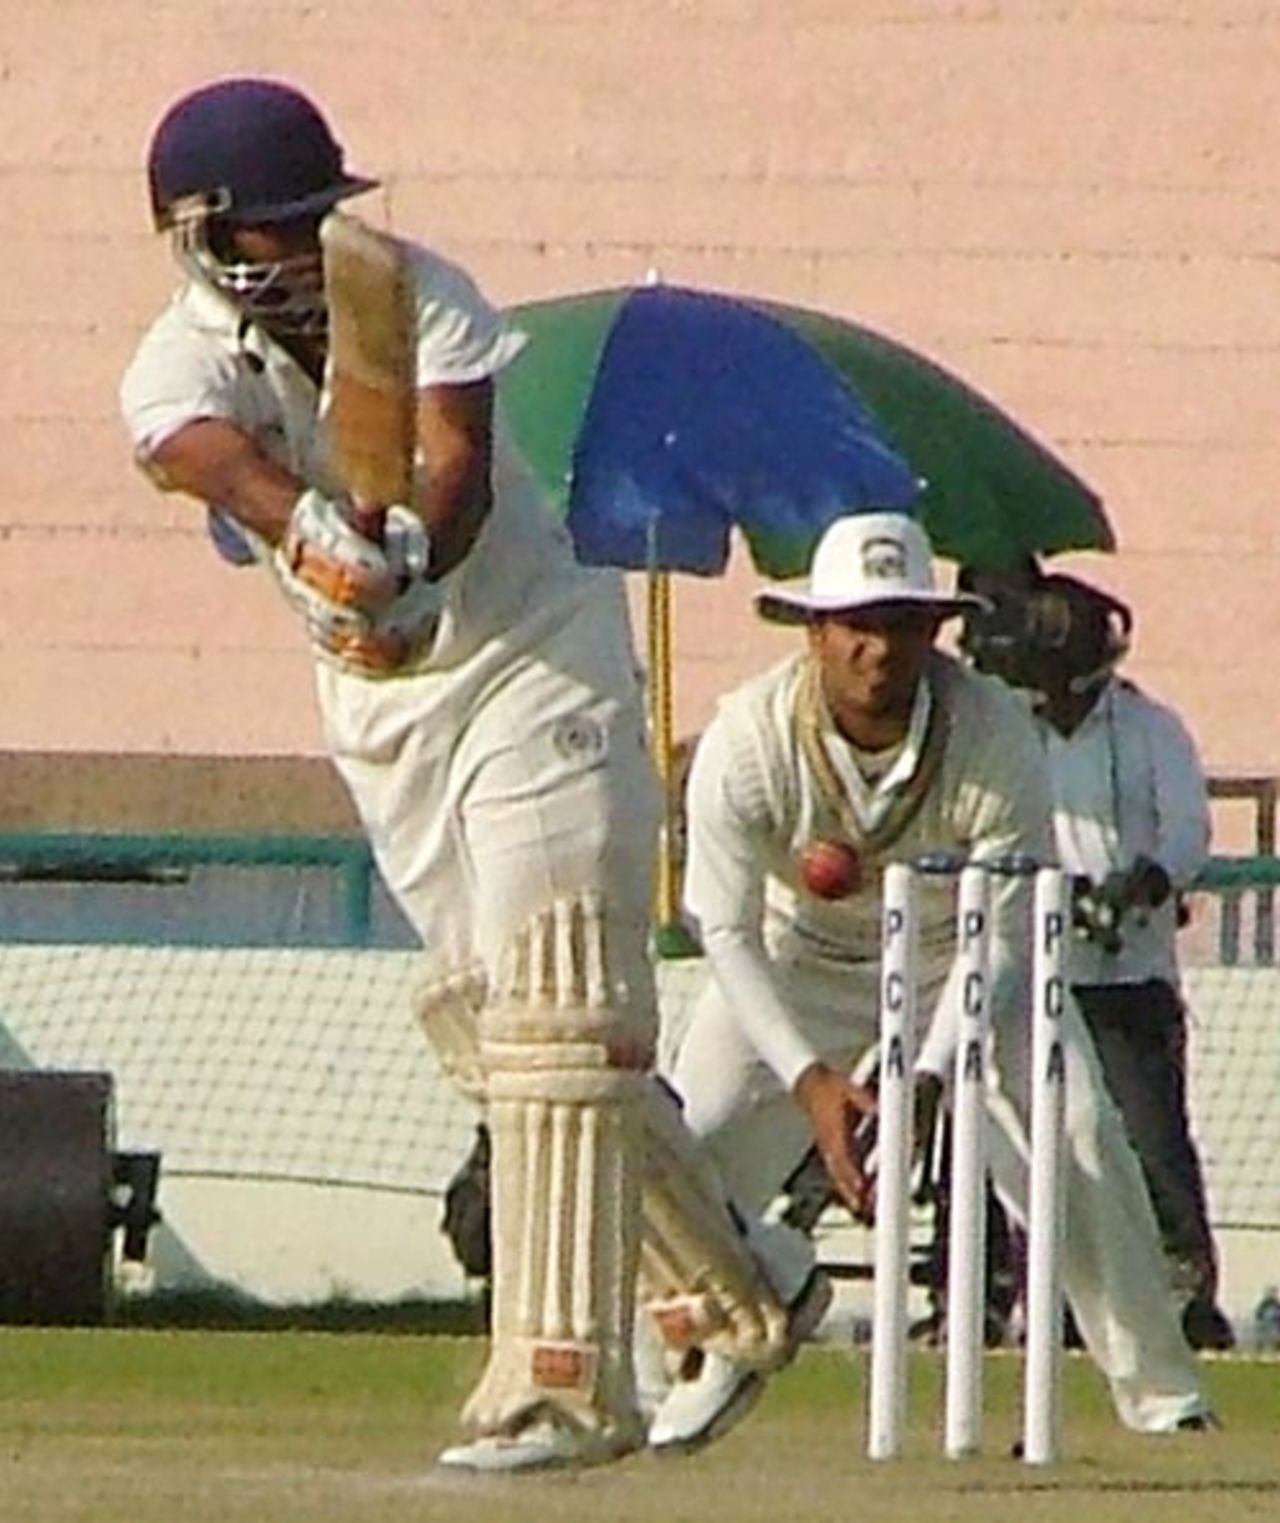 Ravi Teja scored a hundred in Hyderabad's second innings, Punjab v Hyderabad, Ranji Trophy Super League, 2nd round, Mohali, 4th day, November 18, 2007